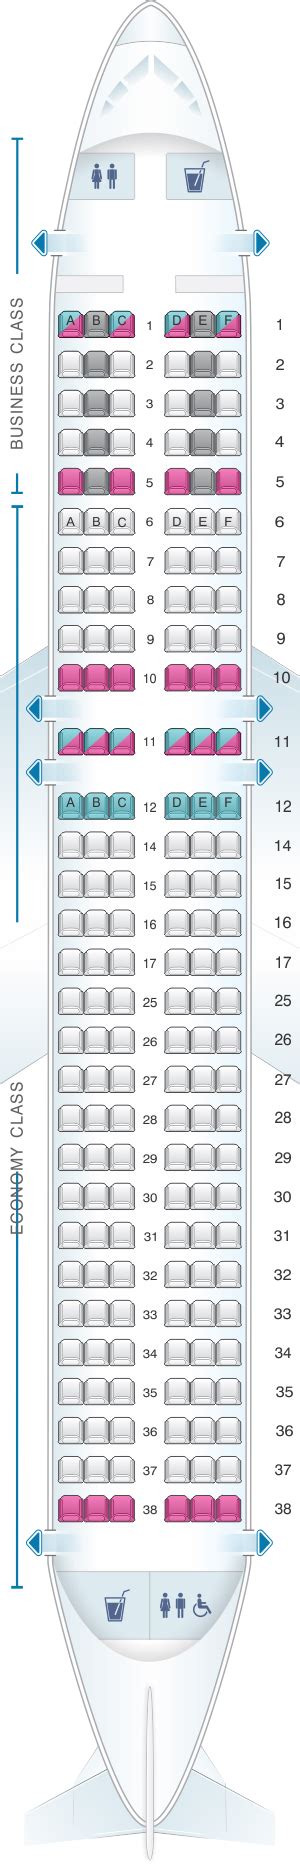 Airbus A320 Seat Map Color 2018